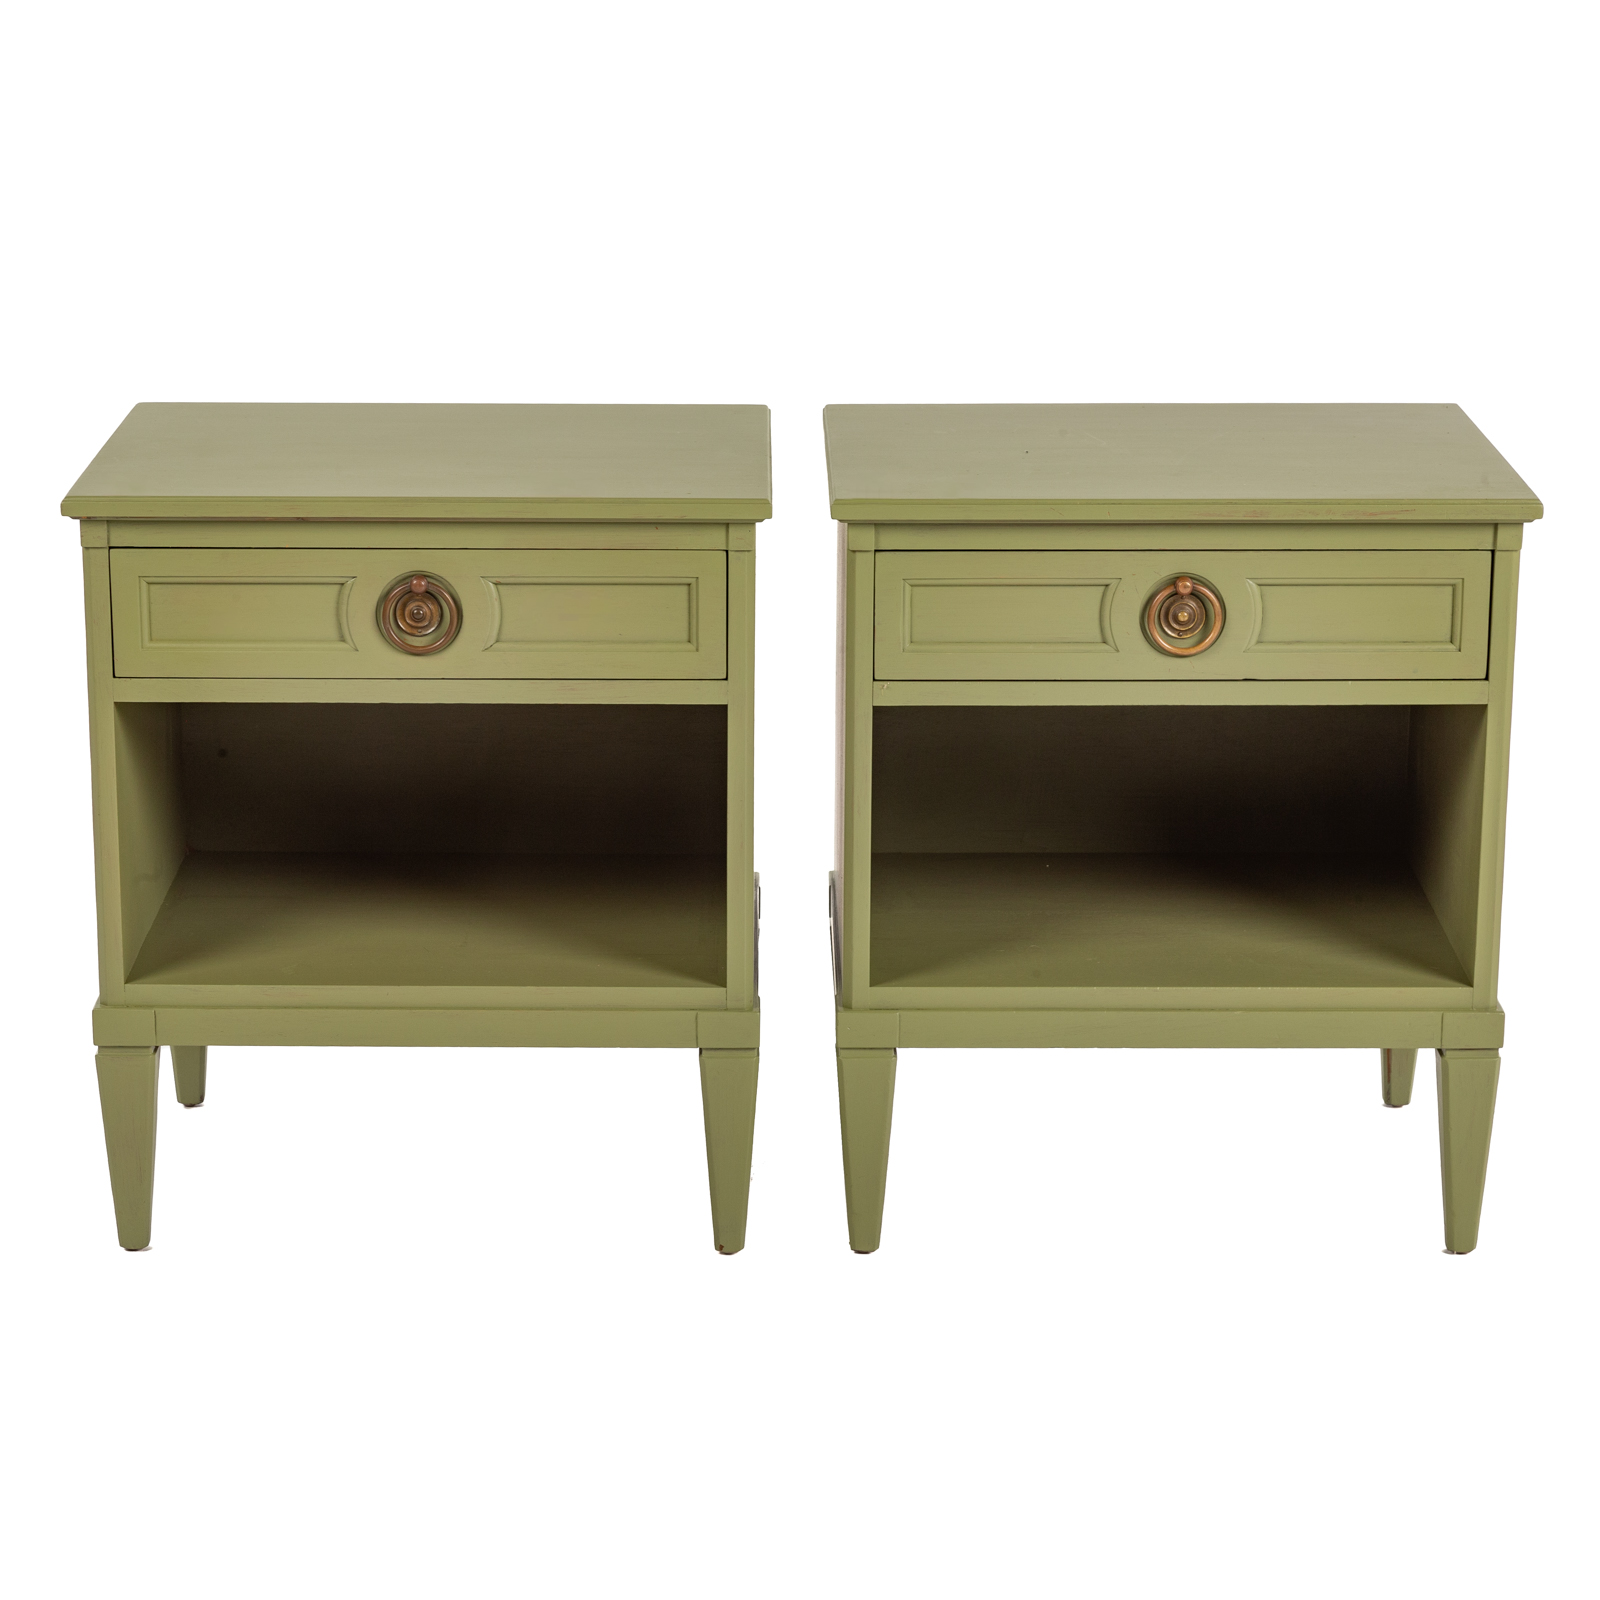 A PAIR OF HENREDON CONTEMPORARY PAINTED